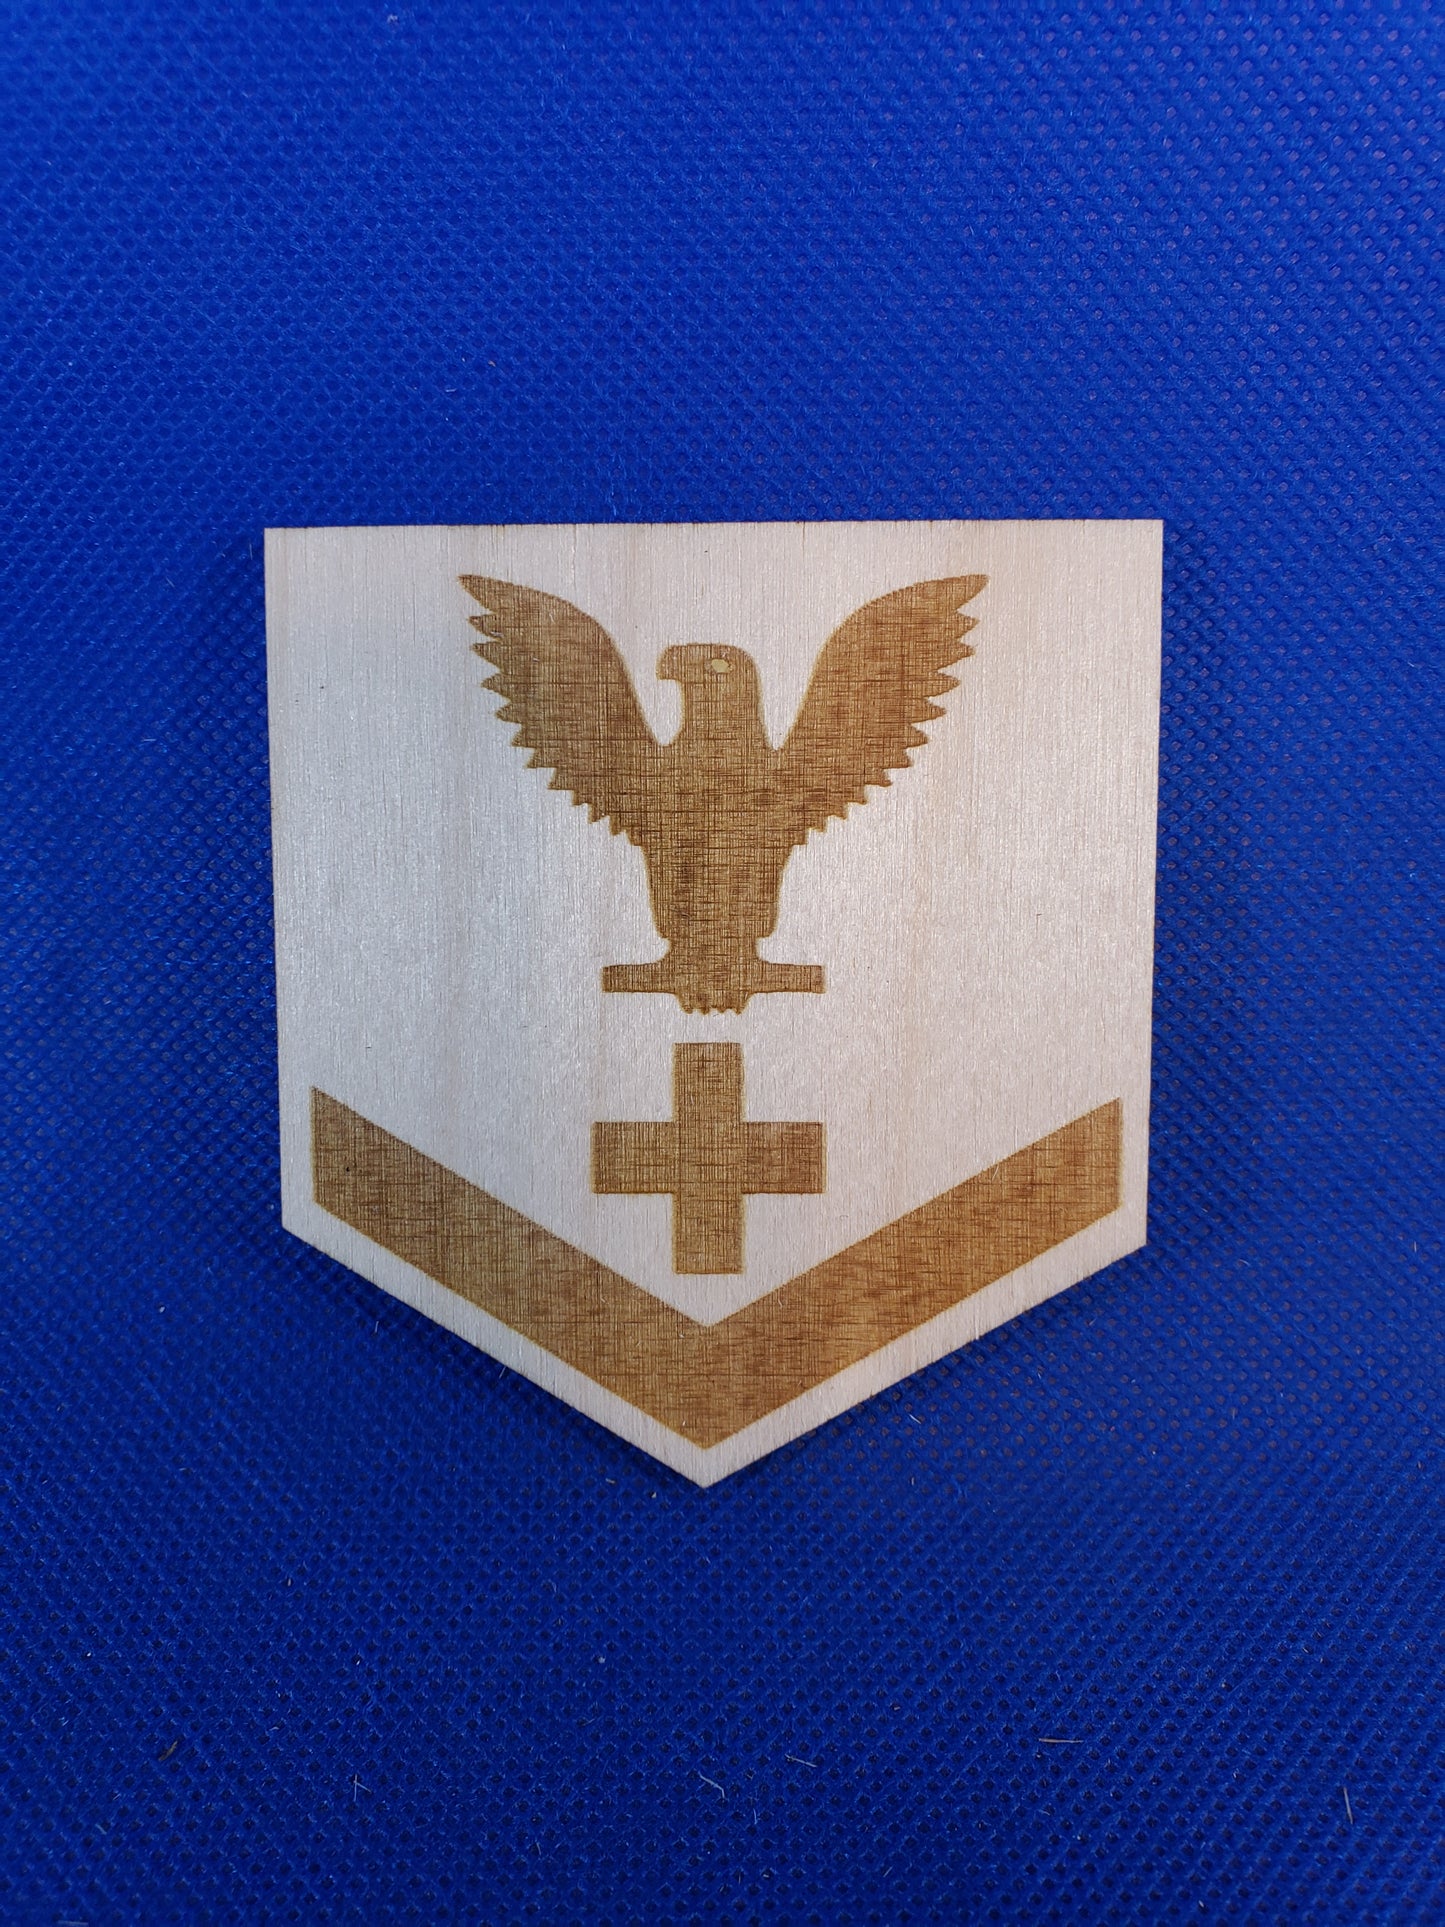 US Navy Pharmacist Mate 3rd Class - Laser cut natural wooden blanks